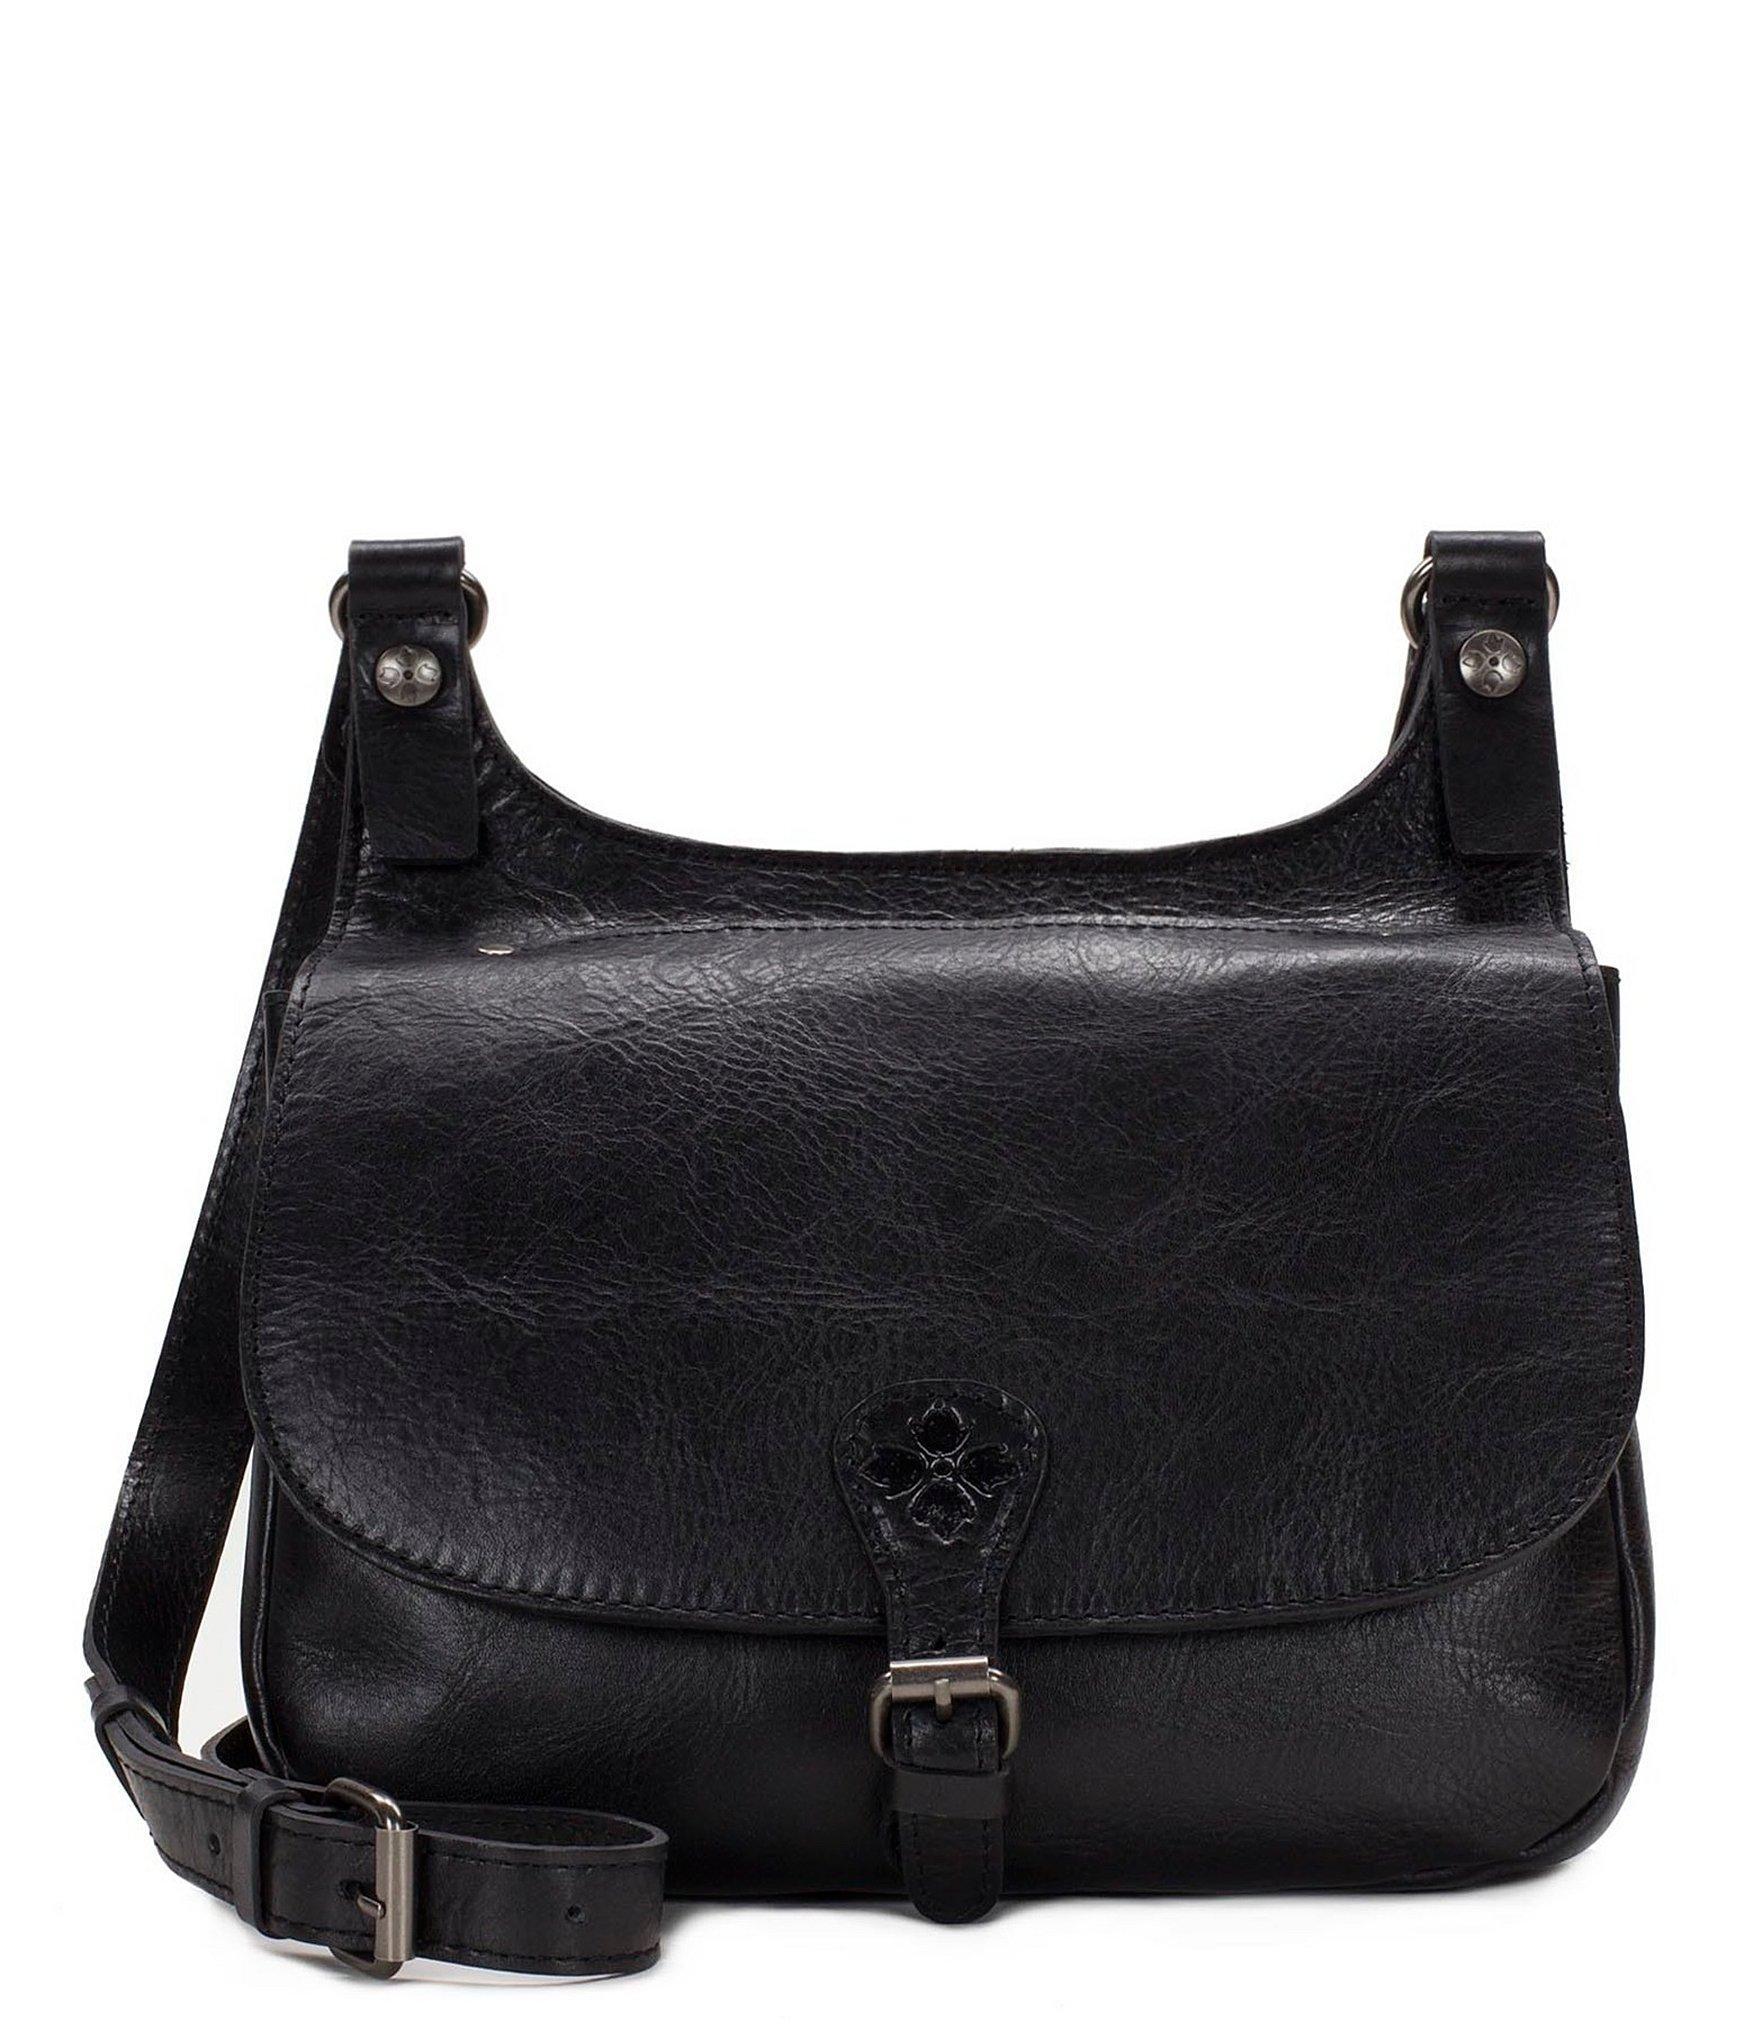 Patricia Nash Leather Distressed Vintage Collection Saddle Crossbody Bag in Black - Lyst